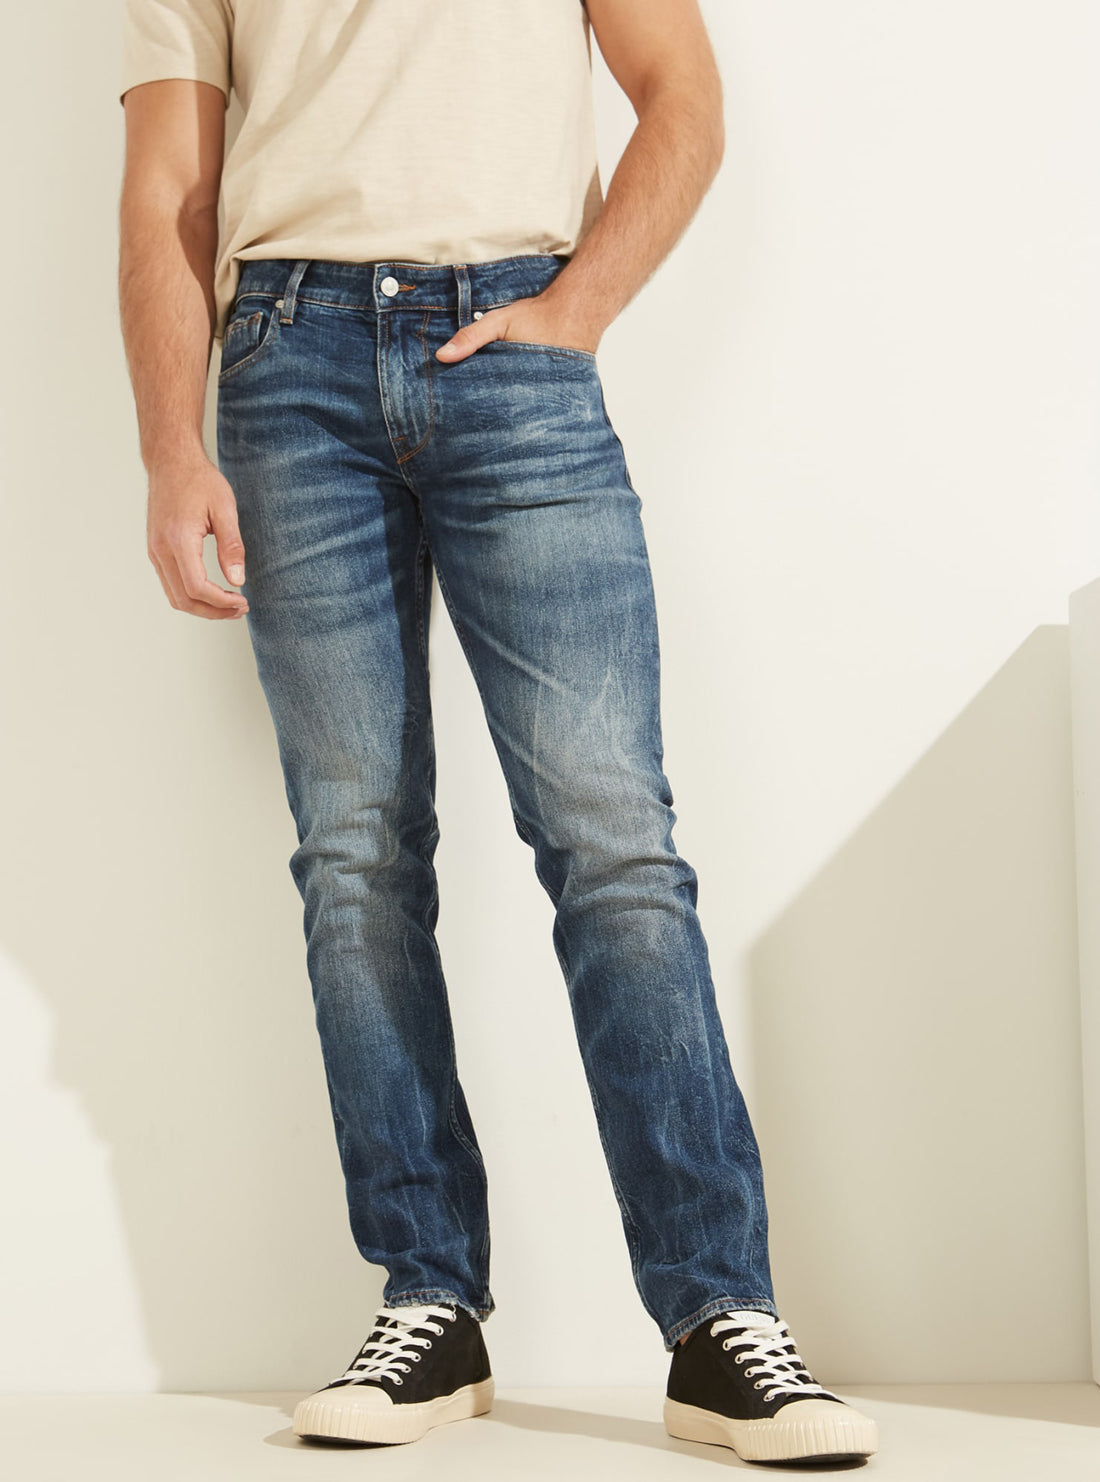 GUESS Mens Eco Mid-Rise Slim Tapered Denim Jeans in Antique Wash M0RAS2R47I1 Front View